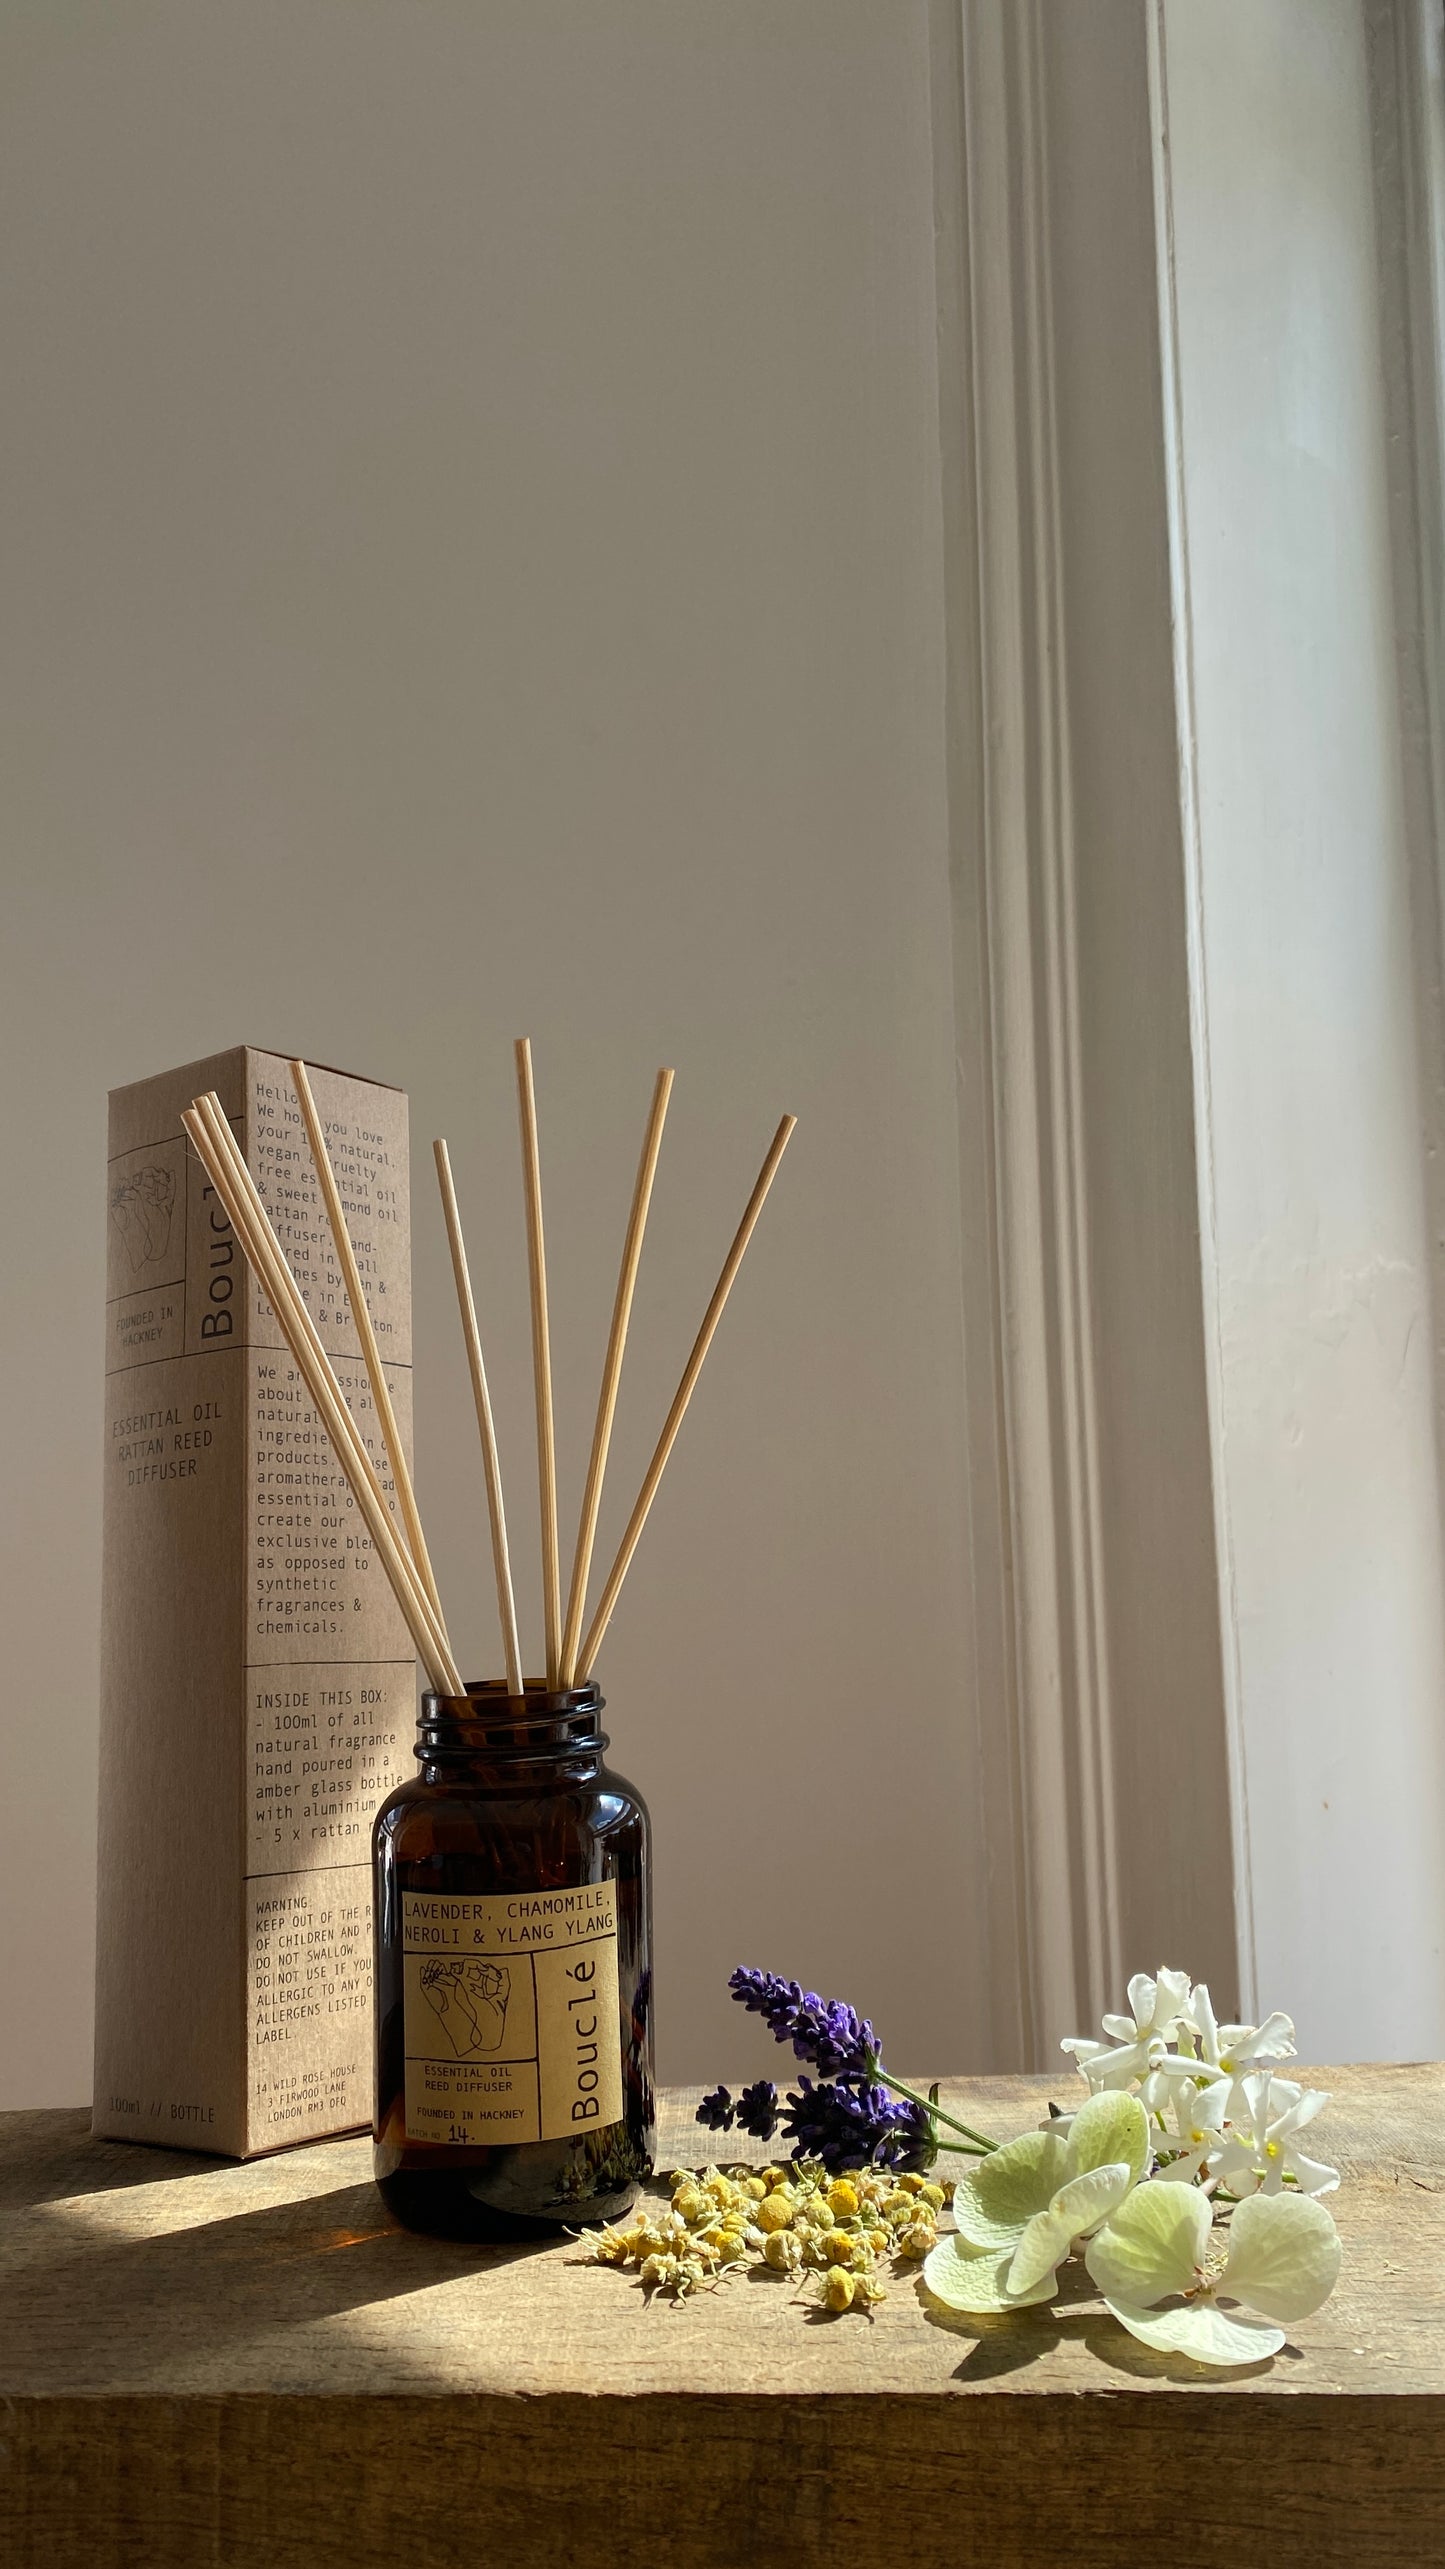 Boucle London stick reed diffuser in amber glass jar. The relaxing sleep diffuser is surrounded by it's ingredients including lavender, neroli, chamomile and ylang ylang.